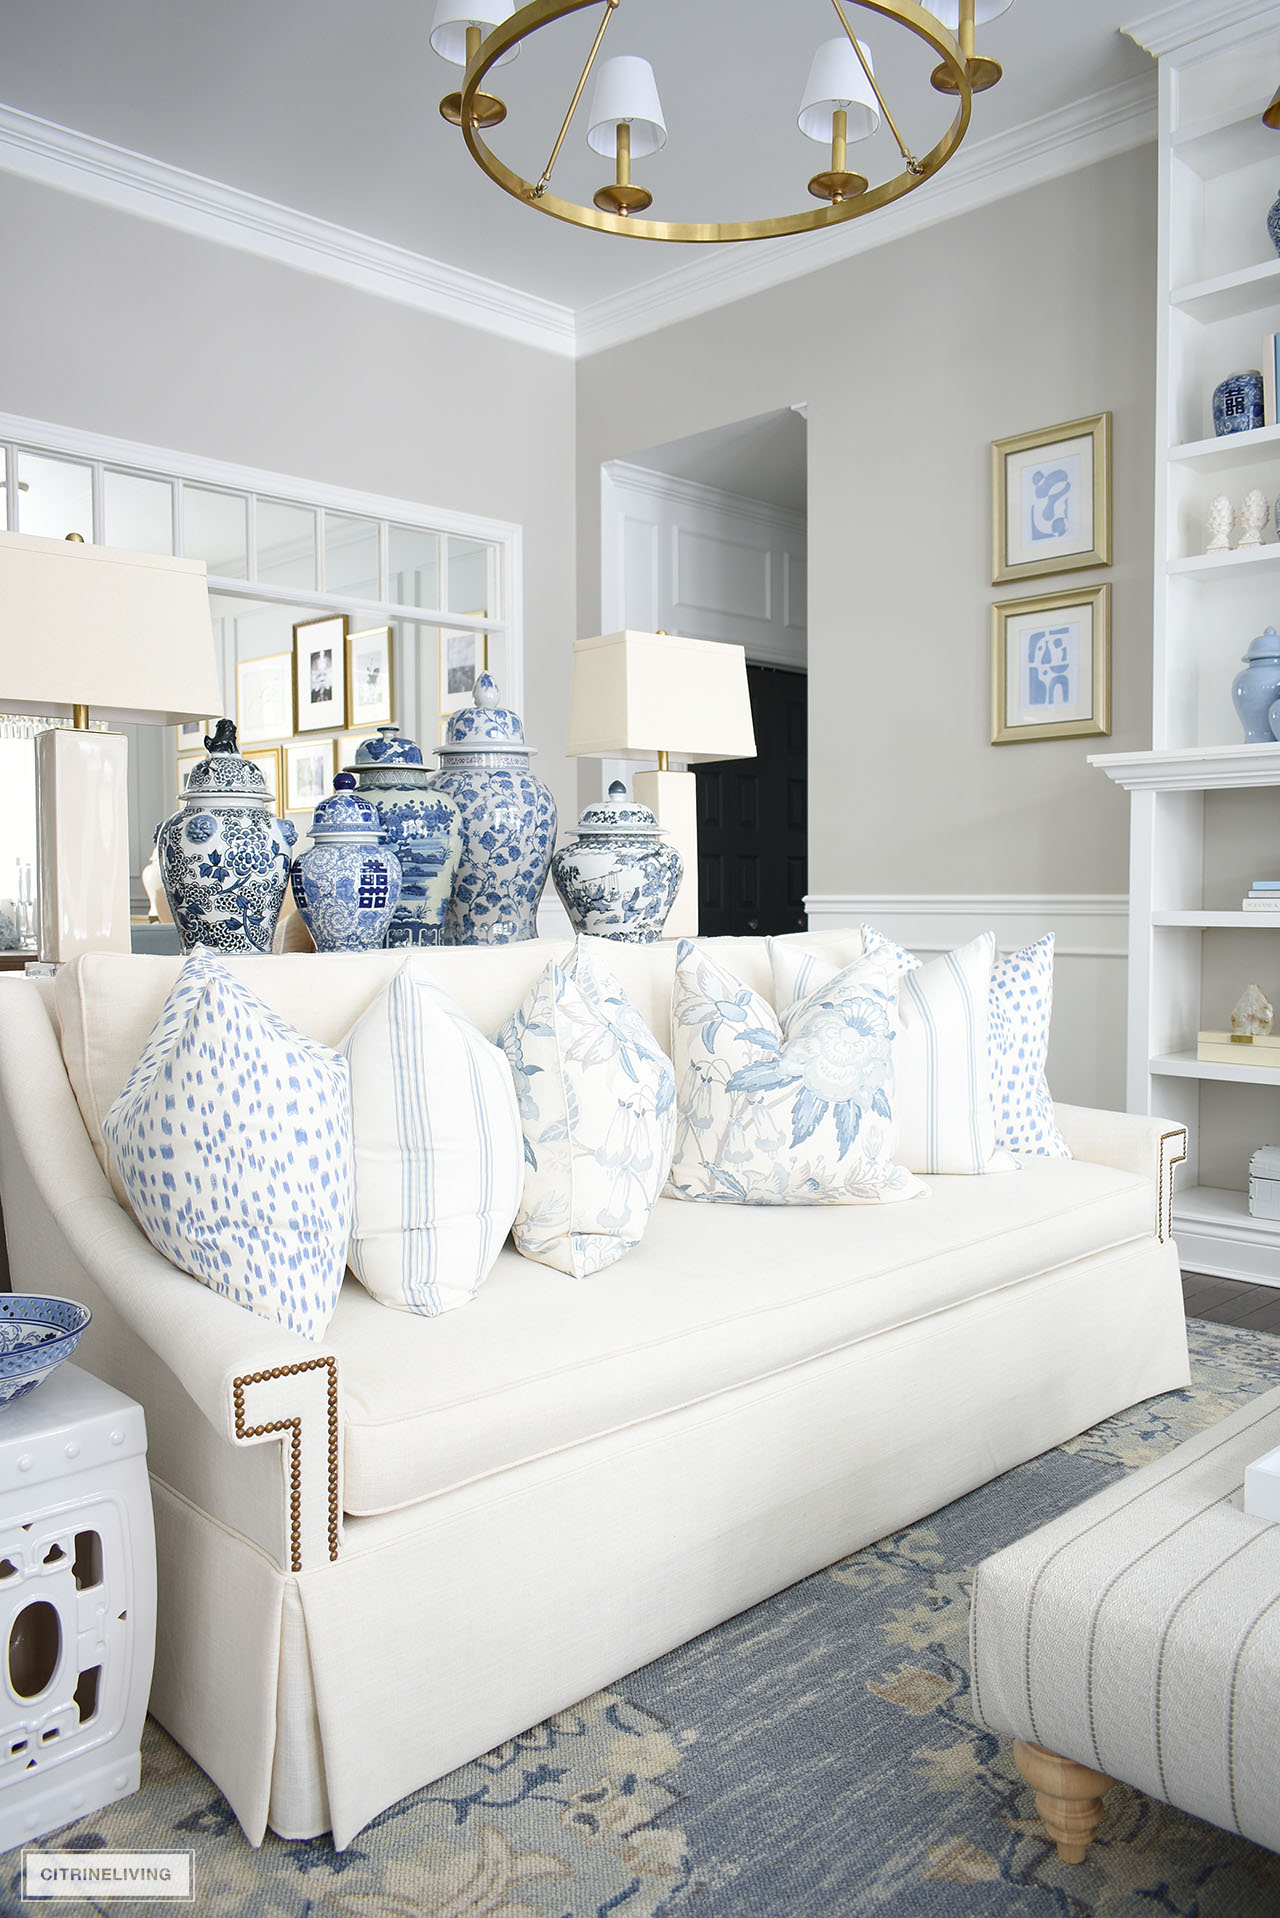 White sofa styled for spring with blue and white pillows in floral, stripe and animal print patterns.